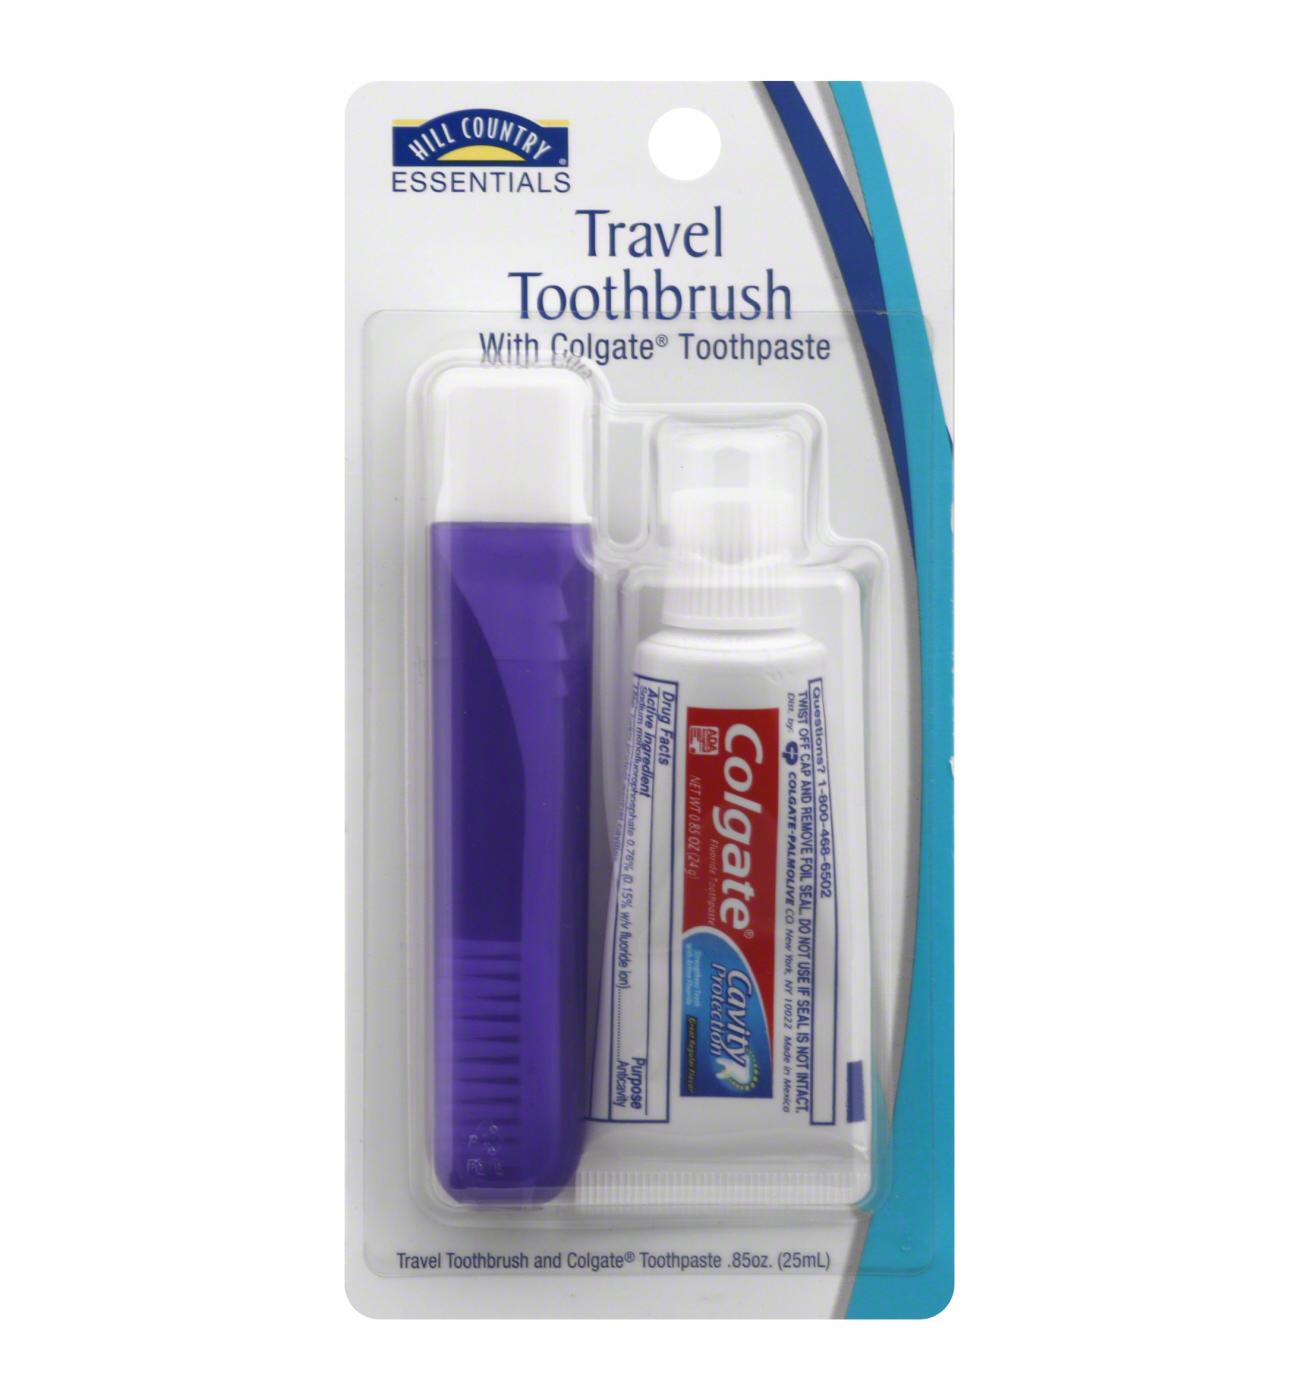 Hill Country Essentials Travel Size Toothbrush With Colgate Toothpaste - Assorted; image 1 of 5